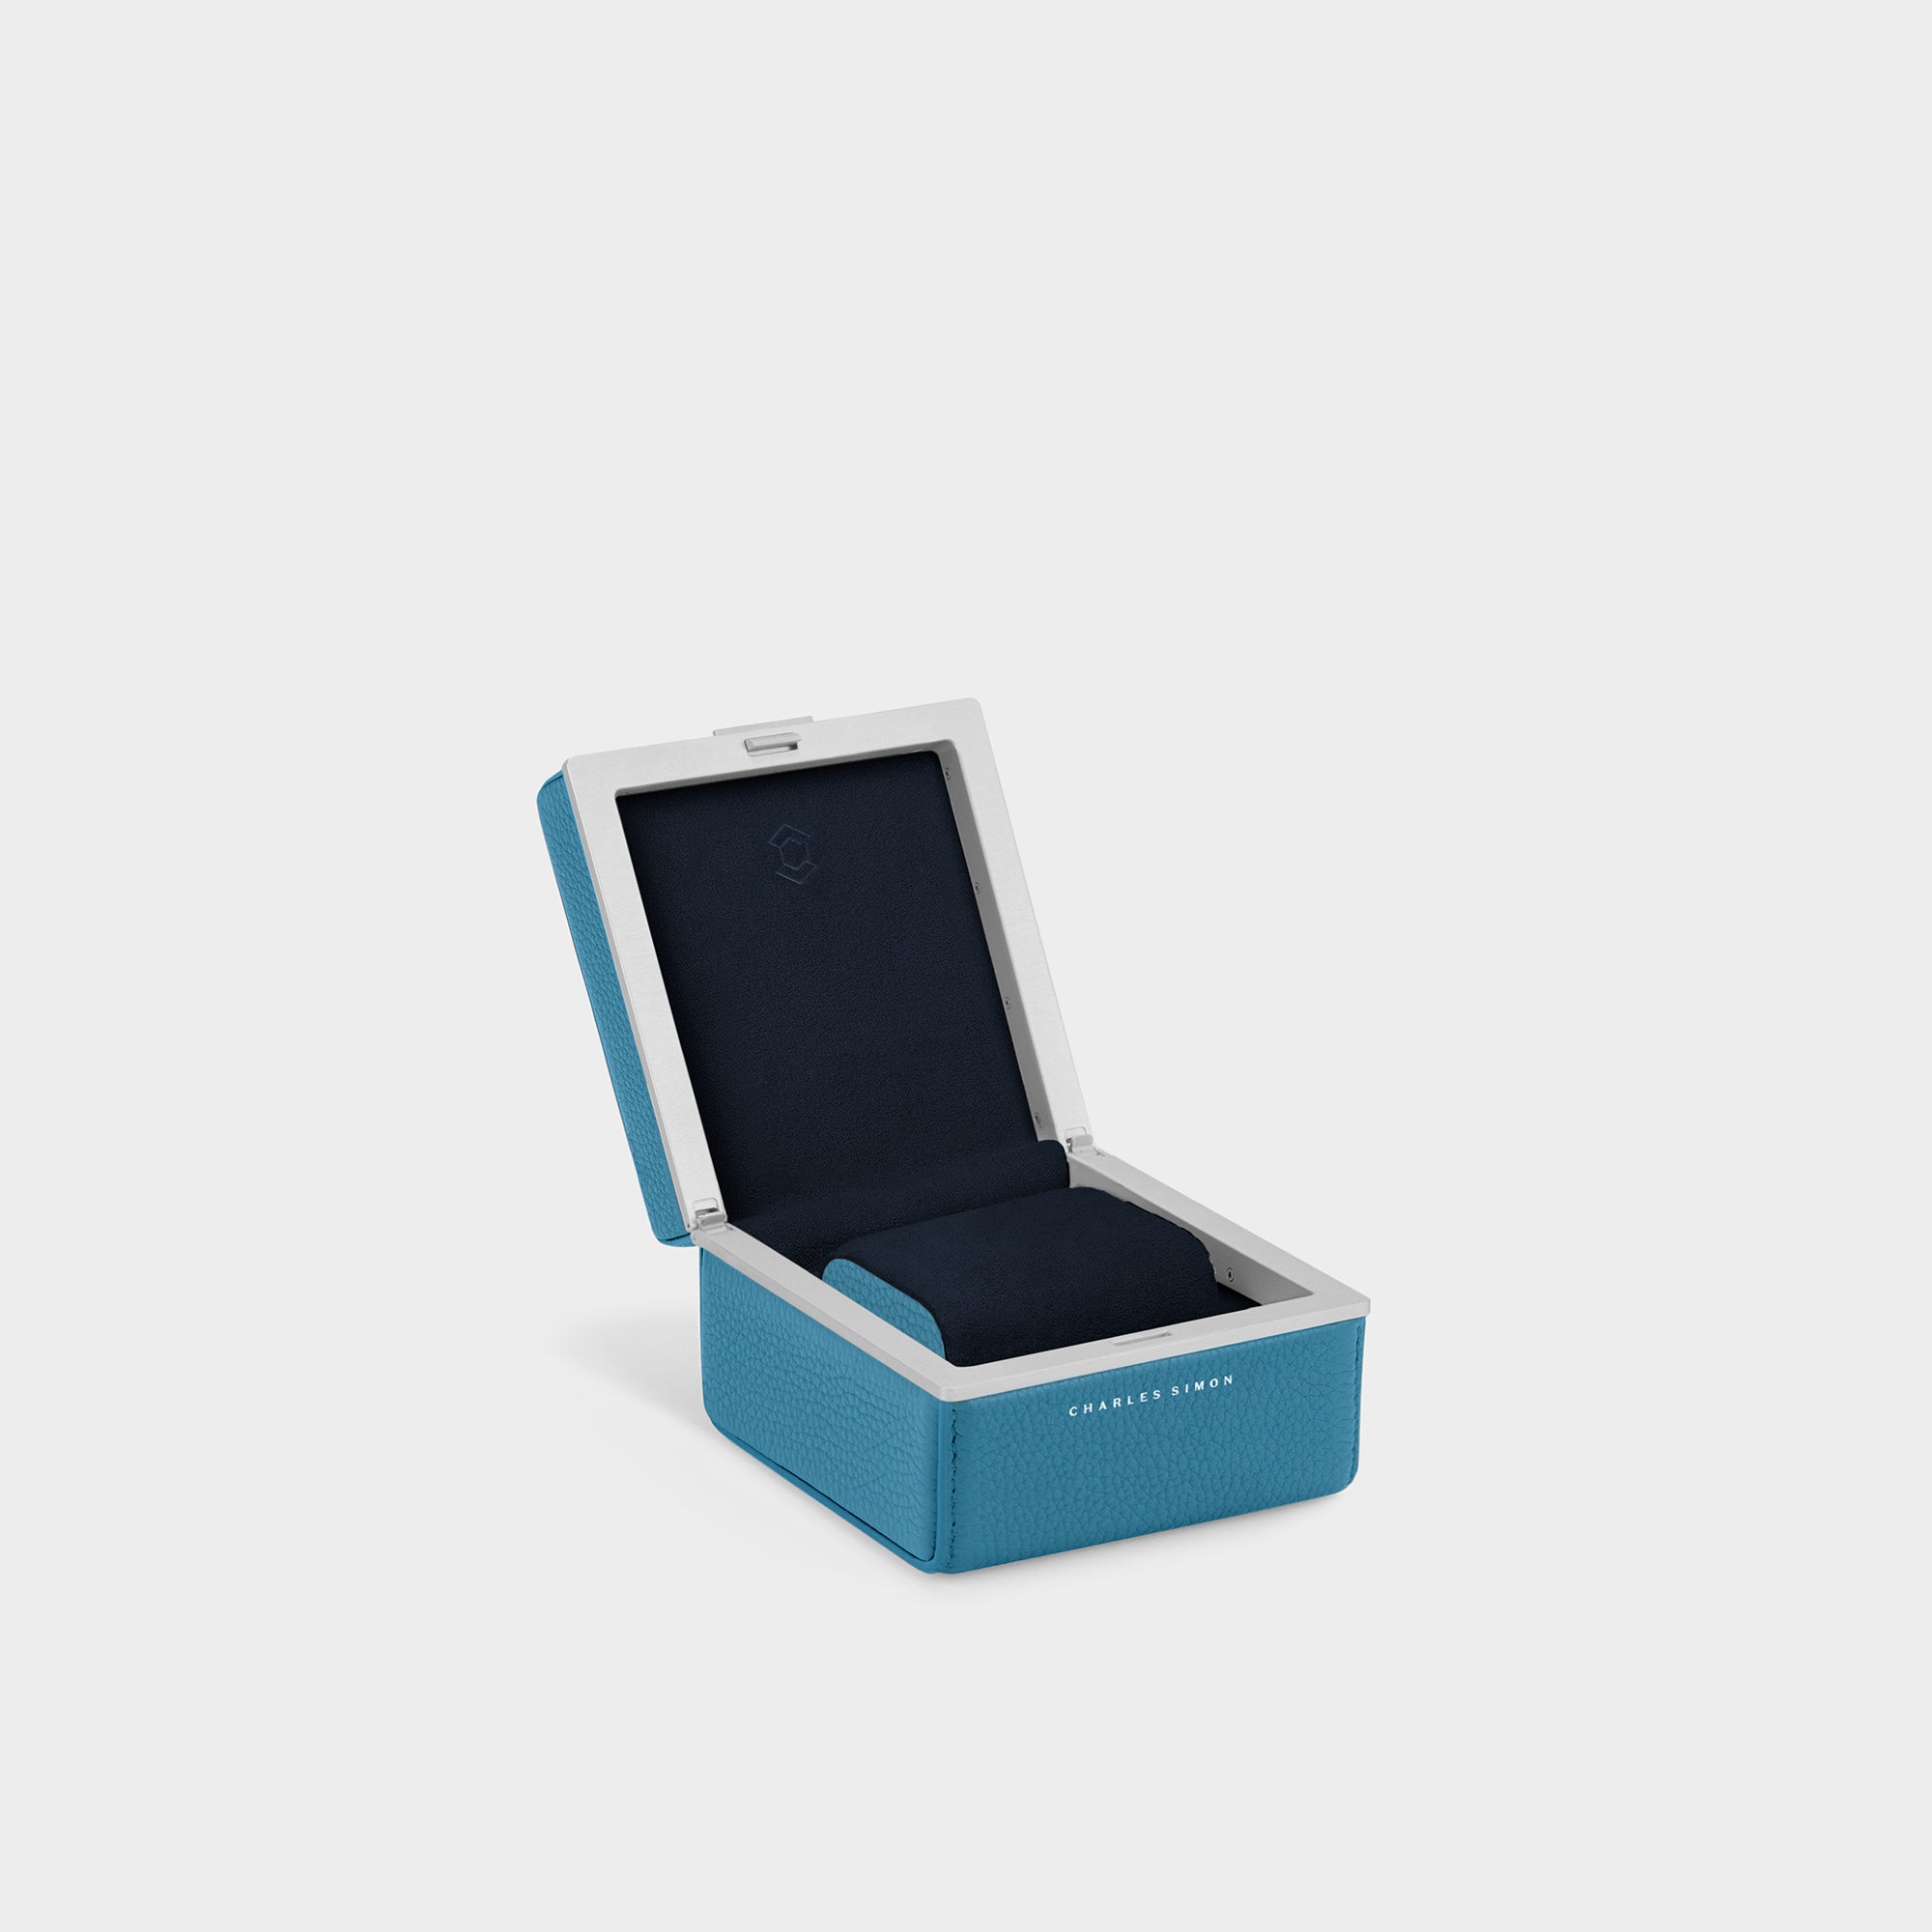 Eaton 1 watch case for 1 watch. Handmade from sky blue French leather, anodized aluminum and deep blue Alcantara interior with contrasting sky blue leather accent cushion sides